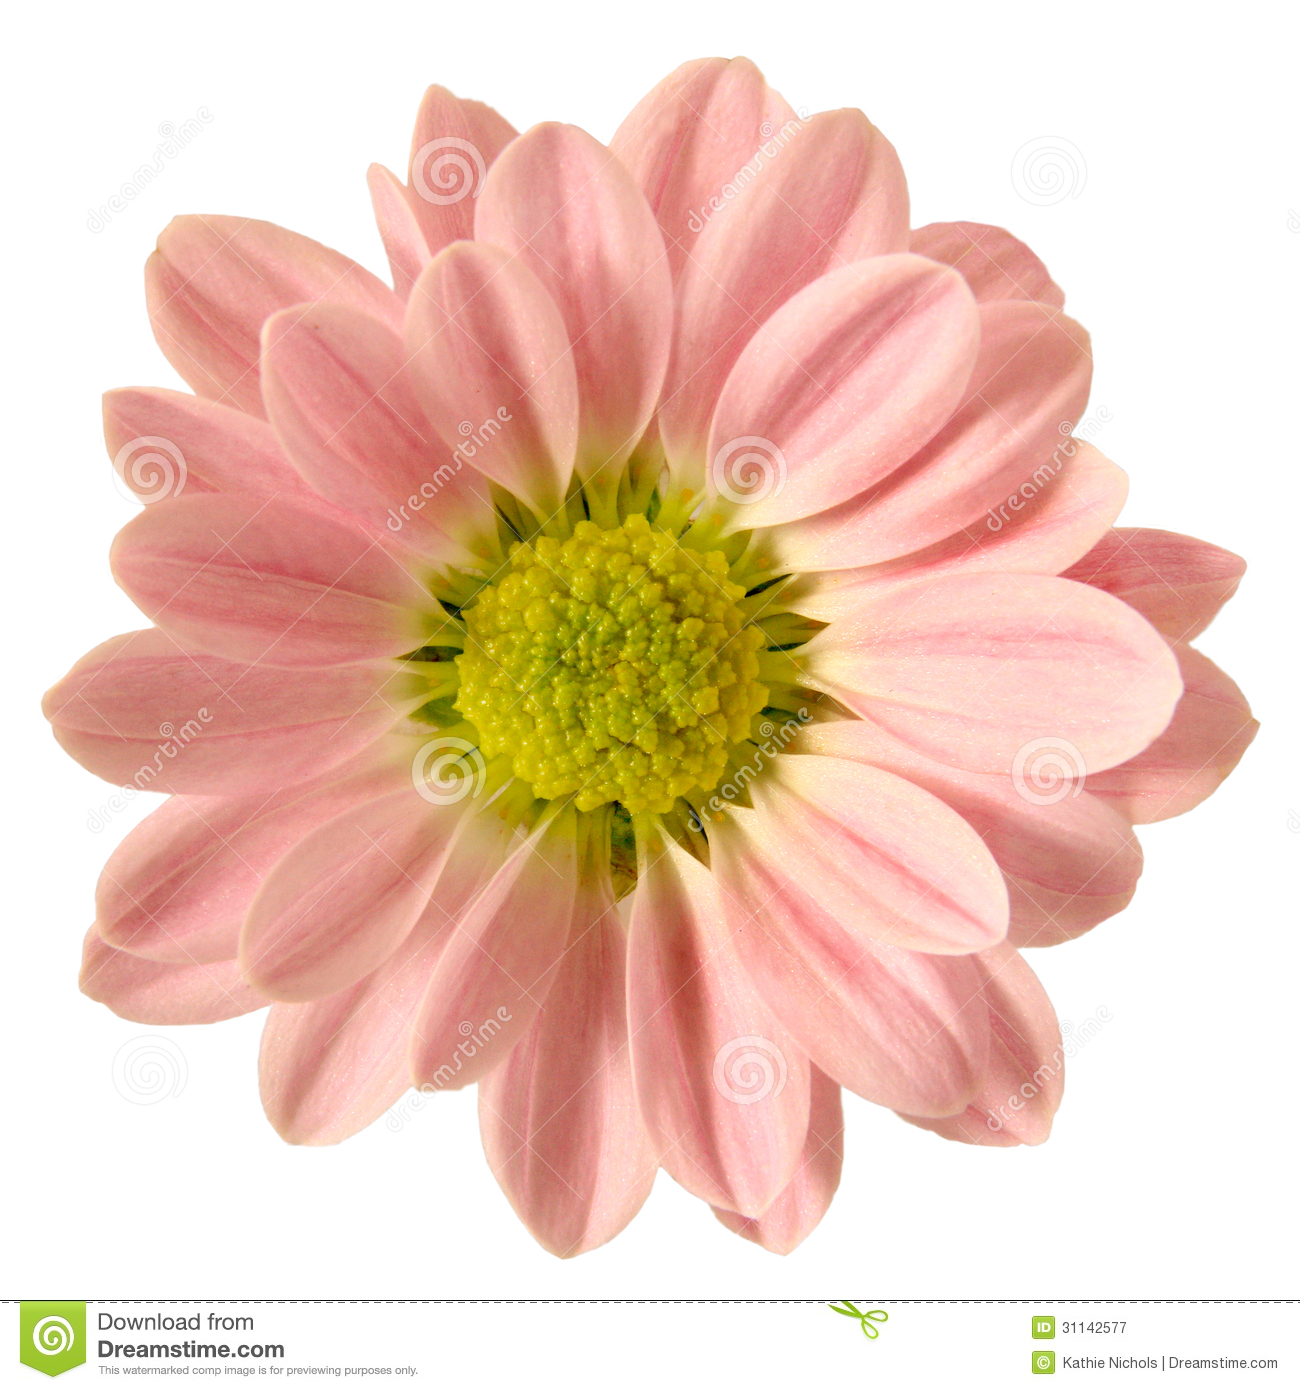 Isolated Pink Daisy Royalty Free Stock Photography   Image  31142577